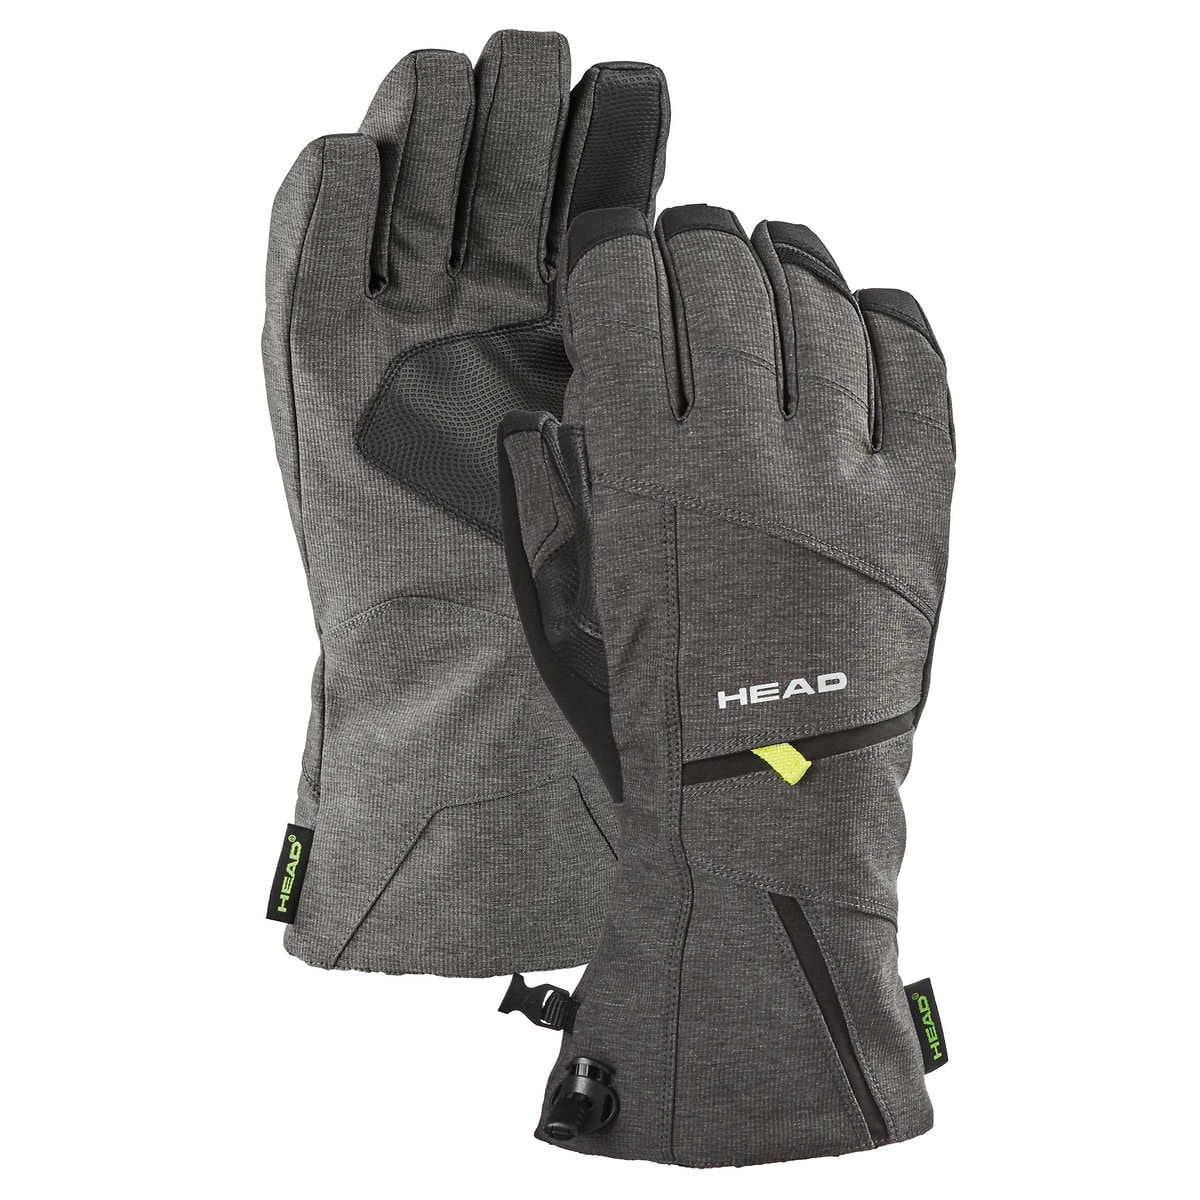 NEW Head YOUTH Cold Weather Ski Gloves DuPont Sorona Multi-Layer Fill-VARIETY